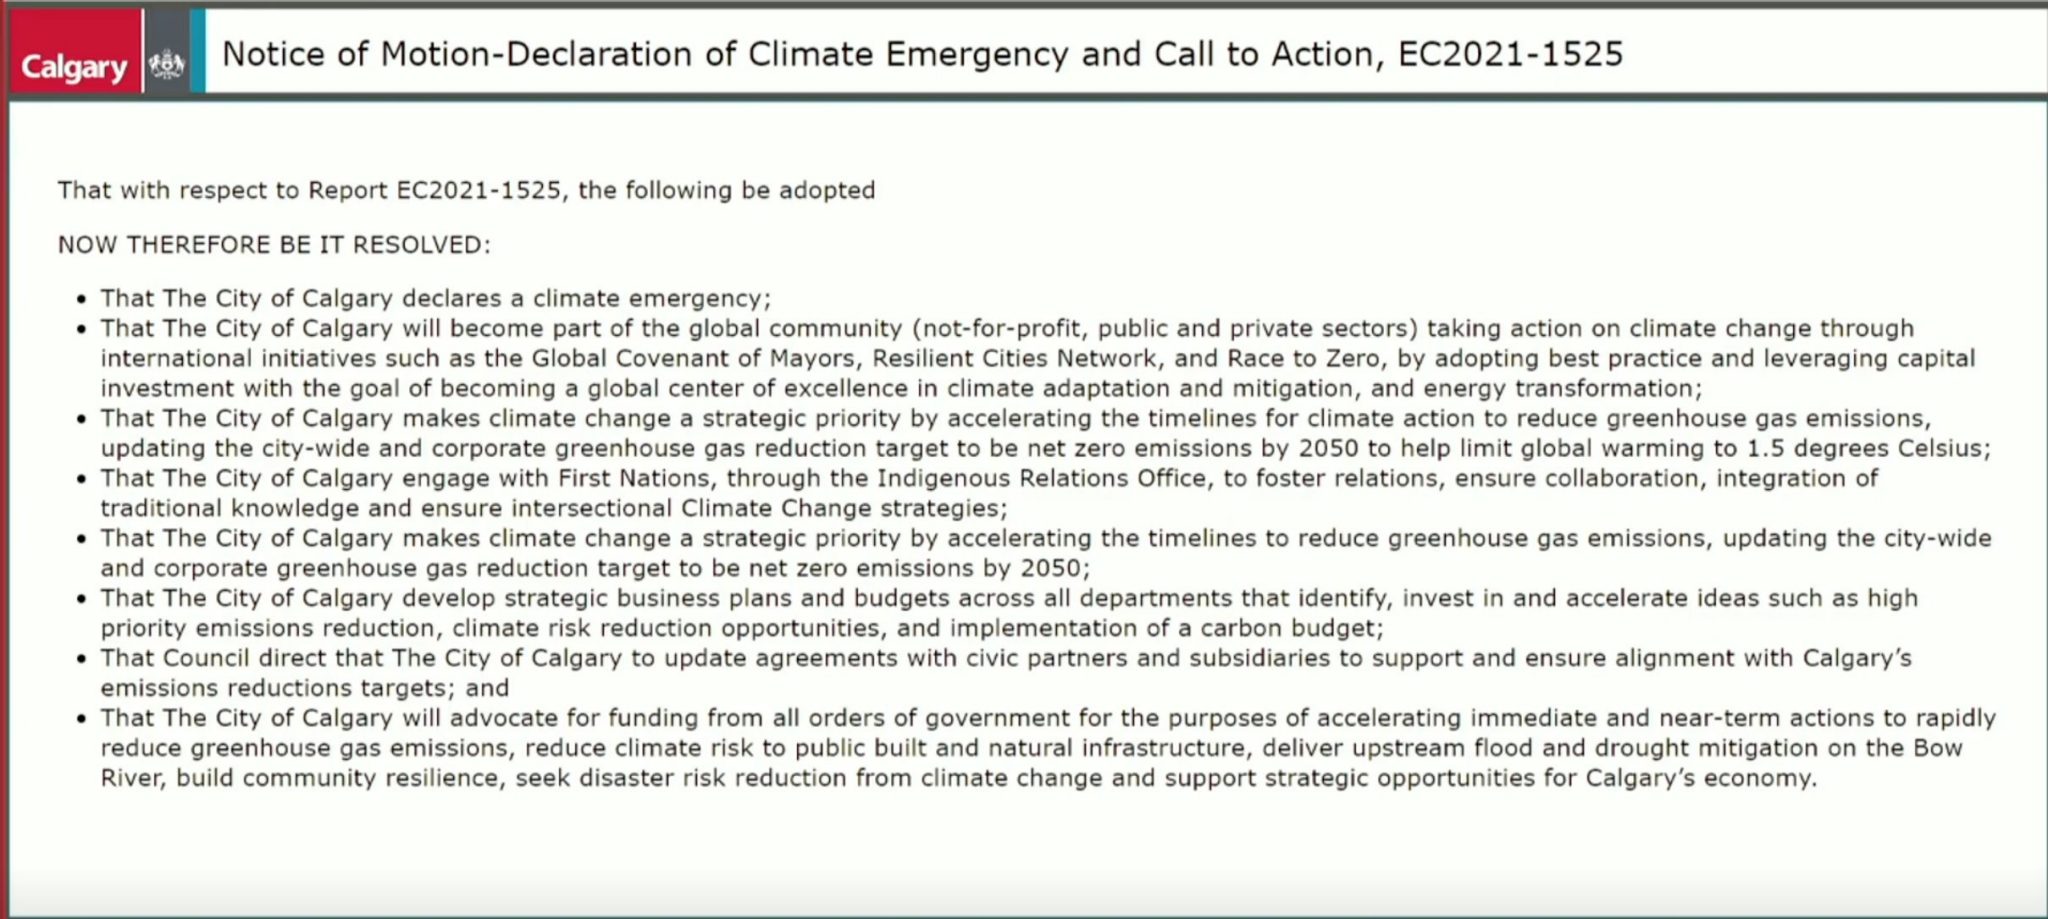 Notice of Motion: Declaration of Climate Emergency and Call to Action